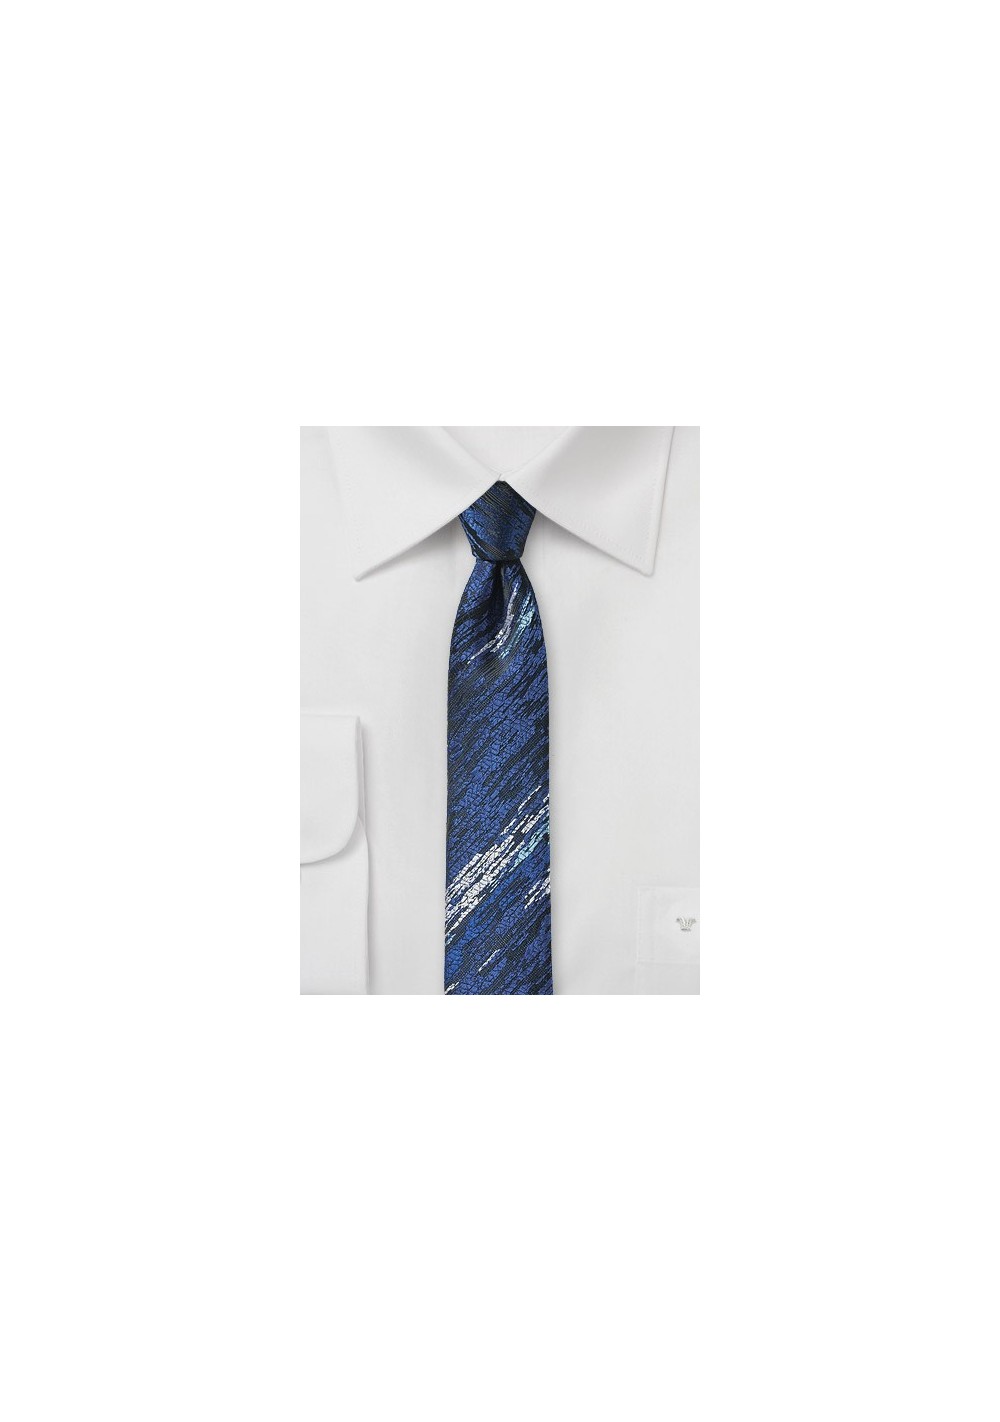 Super Skinny Blue Tie with Wood Grain Texture